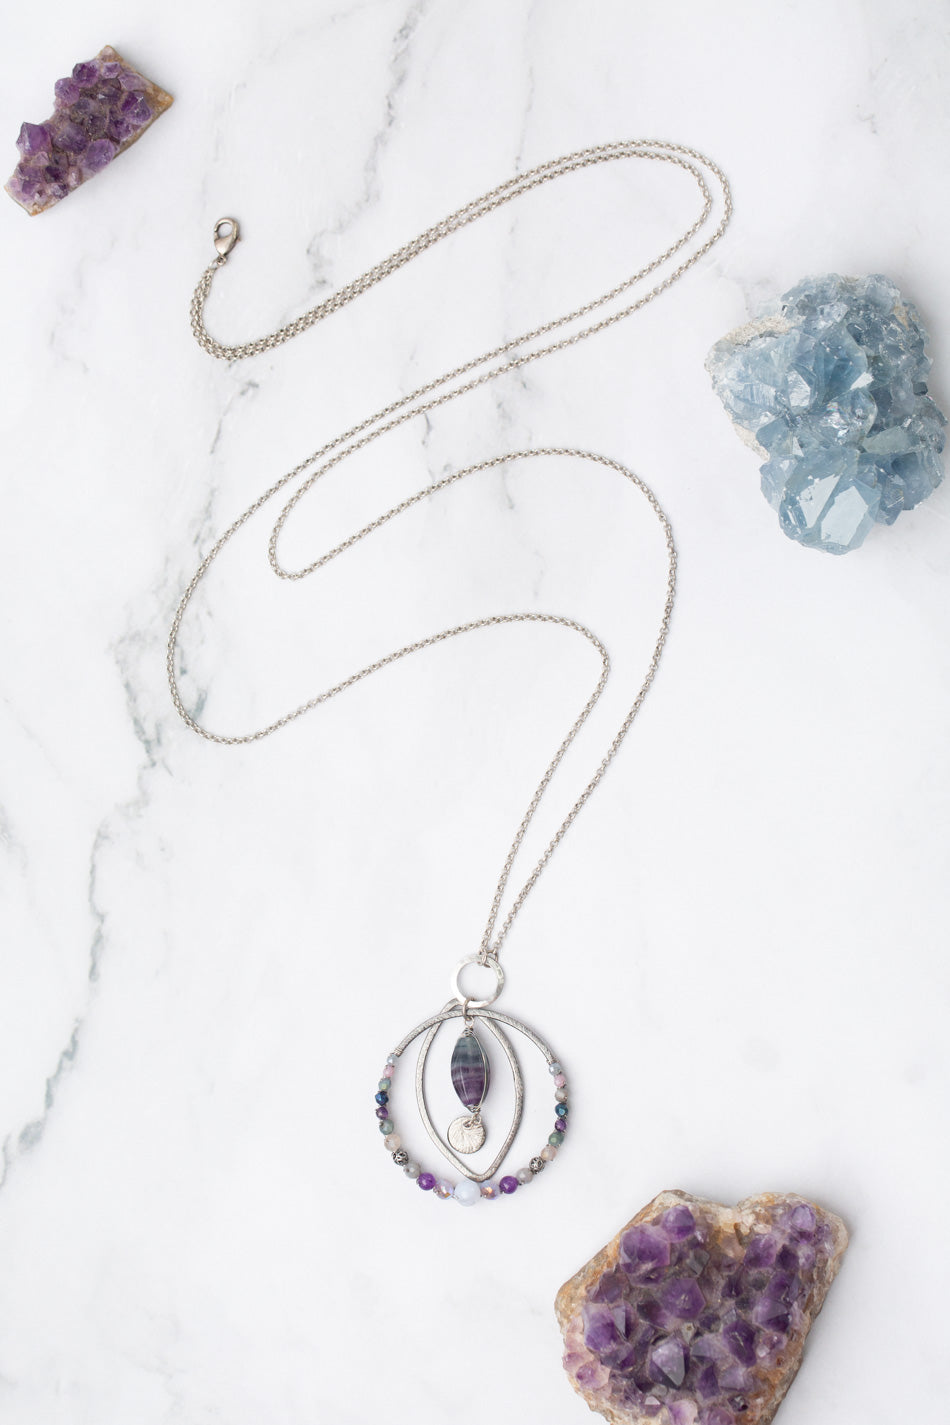 Reflections 22.25 or 44" Amethyst, Czech Glass, Blue Lace Agate with Fluorite Statement Necklace